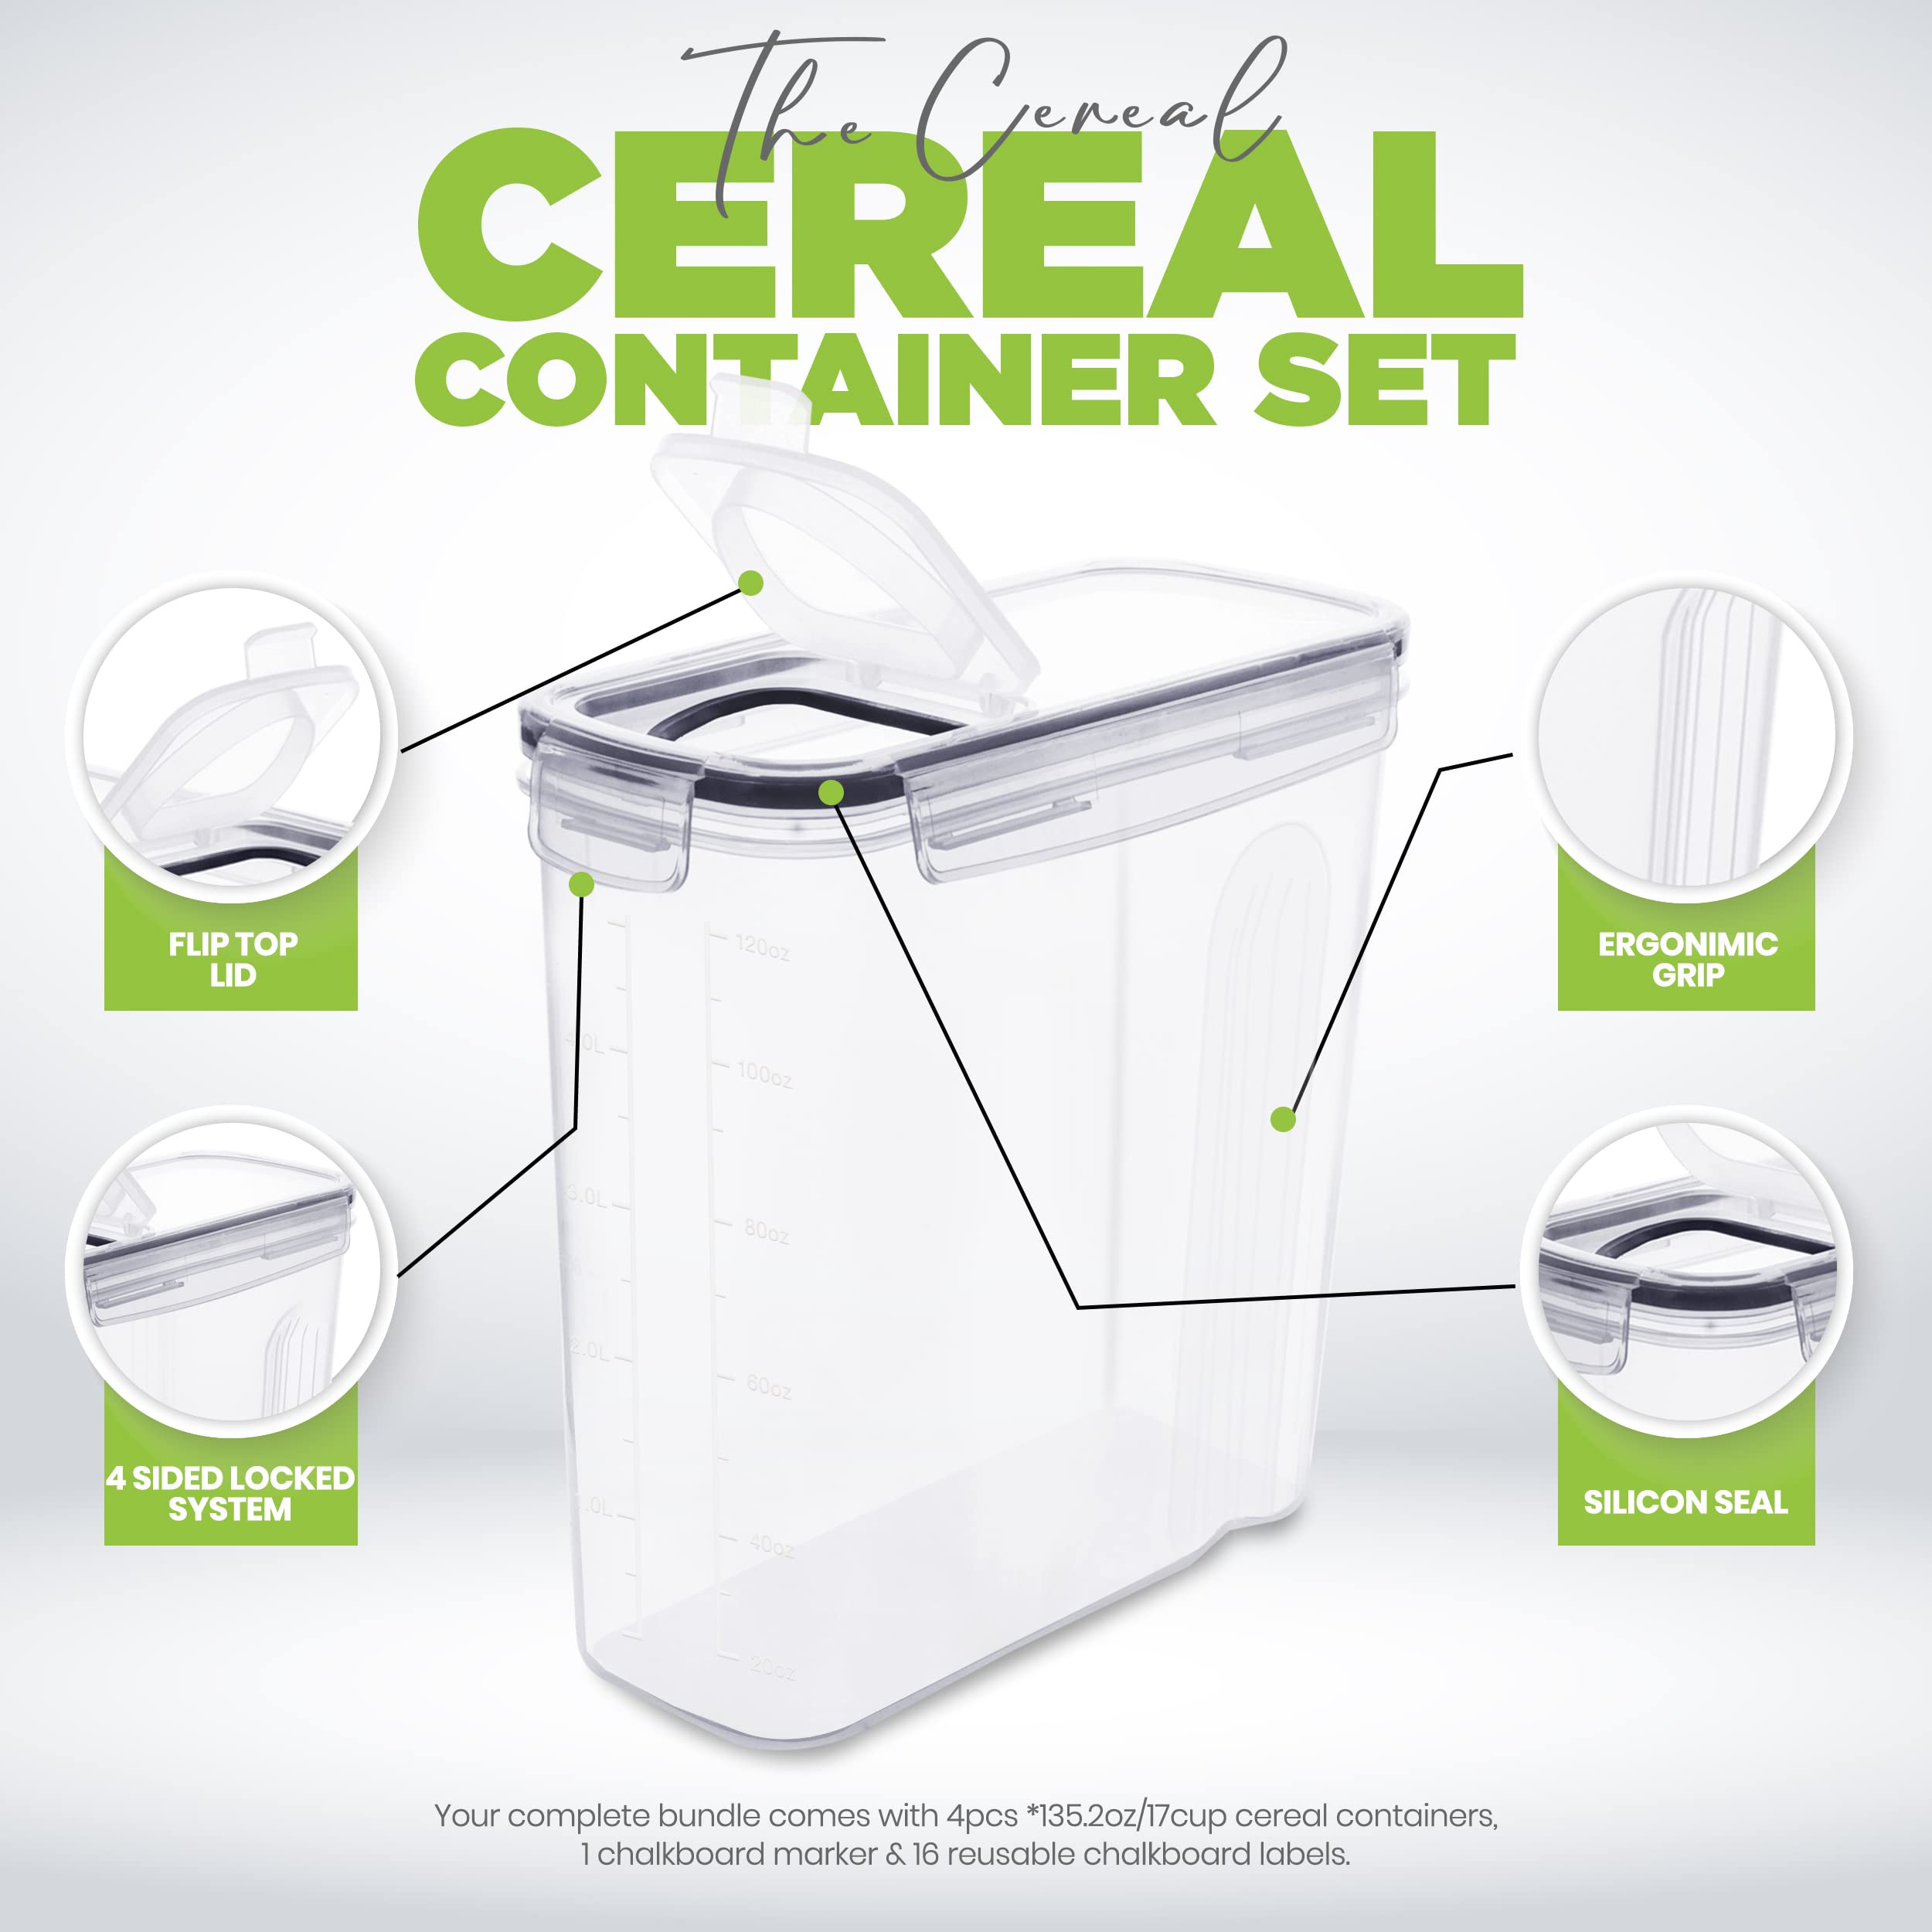 Fast Forward Cereal Containers Storage - Airtight Food Storage Containers & Cereal Dispenser